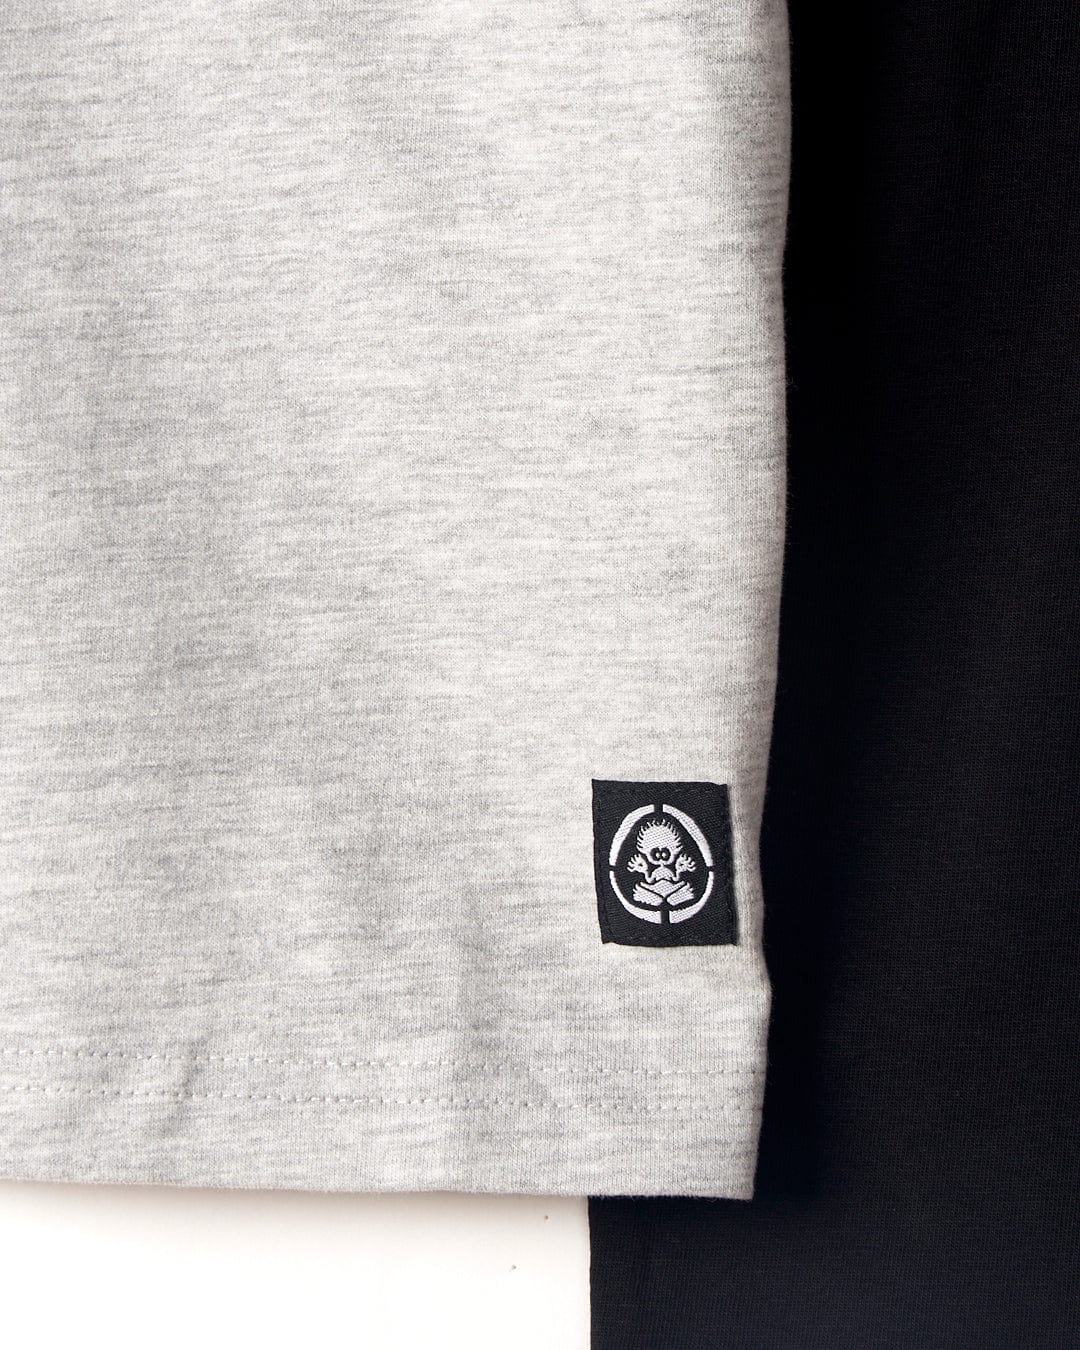 Close-up of a gray fabric with a small black and white Saltrock logo featuring a skull and crossbones near the bottom edge. The fabric is positioned next to a black fabric with raglan contrast sleeves. The garment, known as the Hardskate Warp - Kids Longsleeve Raglan T-Shirt in Grey/Black by Saltrock, is machine washable for easy care.